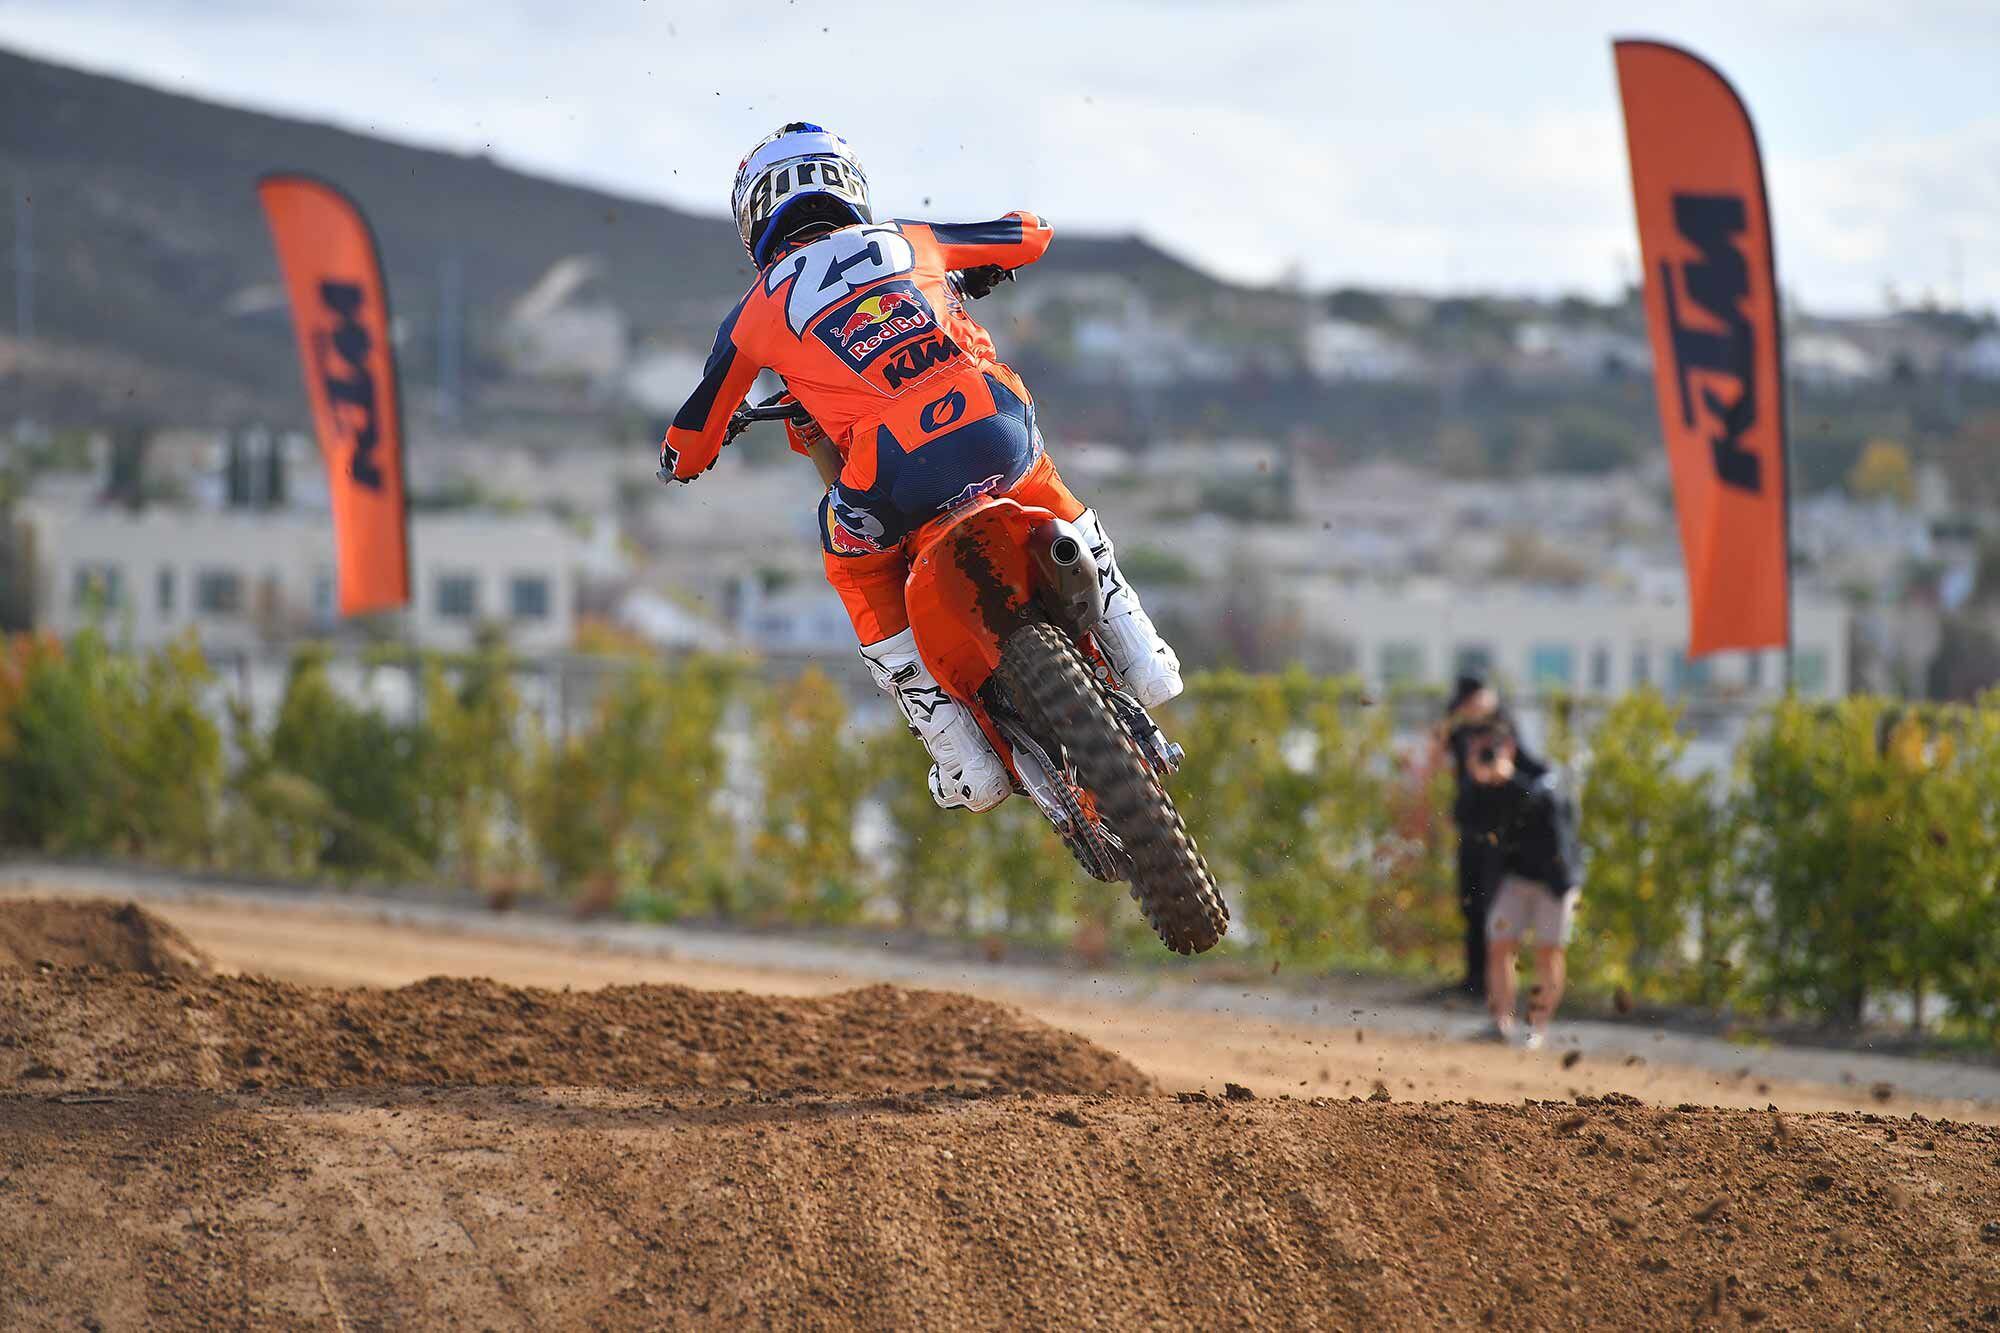 The veteran heading into his 13th year with the team, seemingly ageless Marvin Musquin should also benefit from a year of experience with the new-generation Factory Edition as he looks to move up from his fourth overall in ’22.